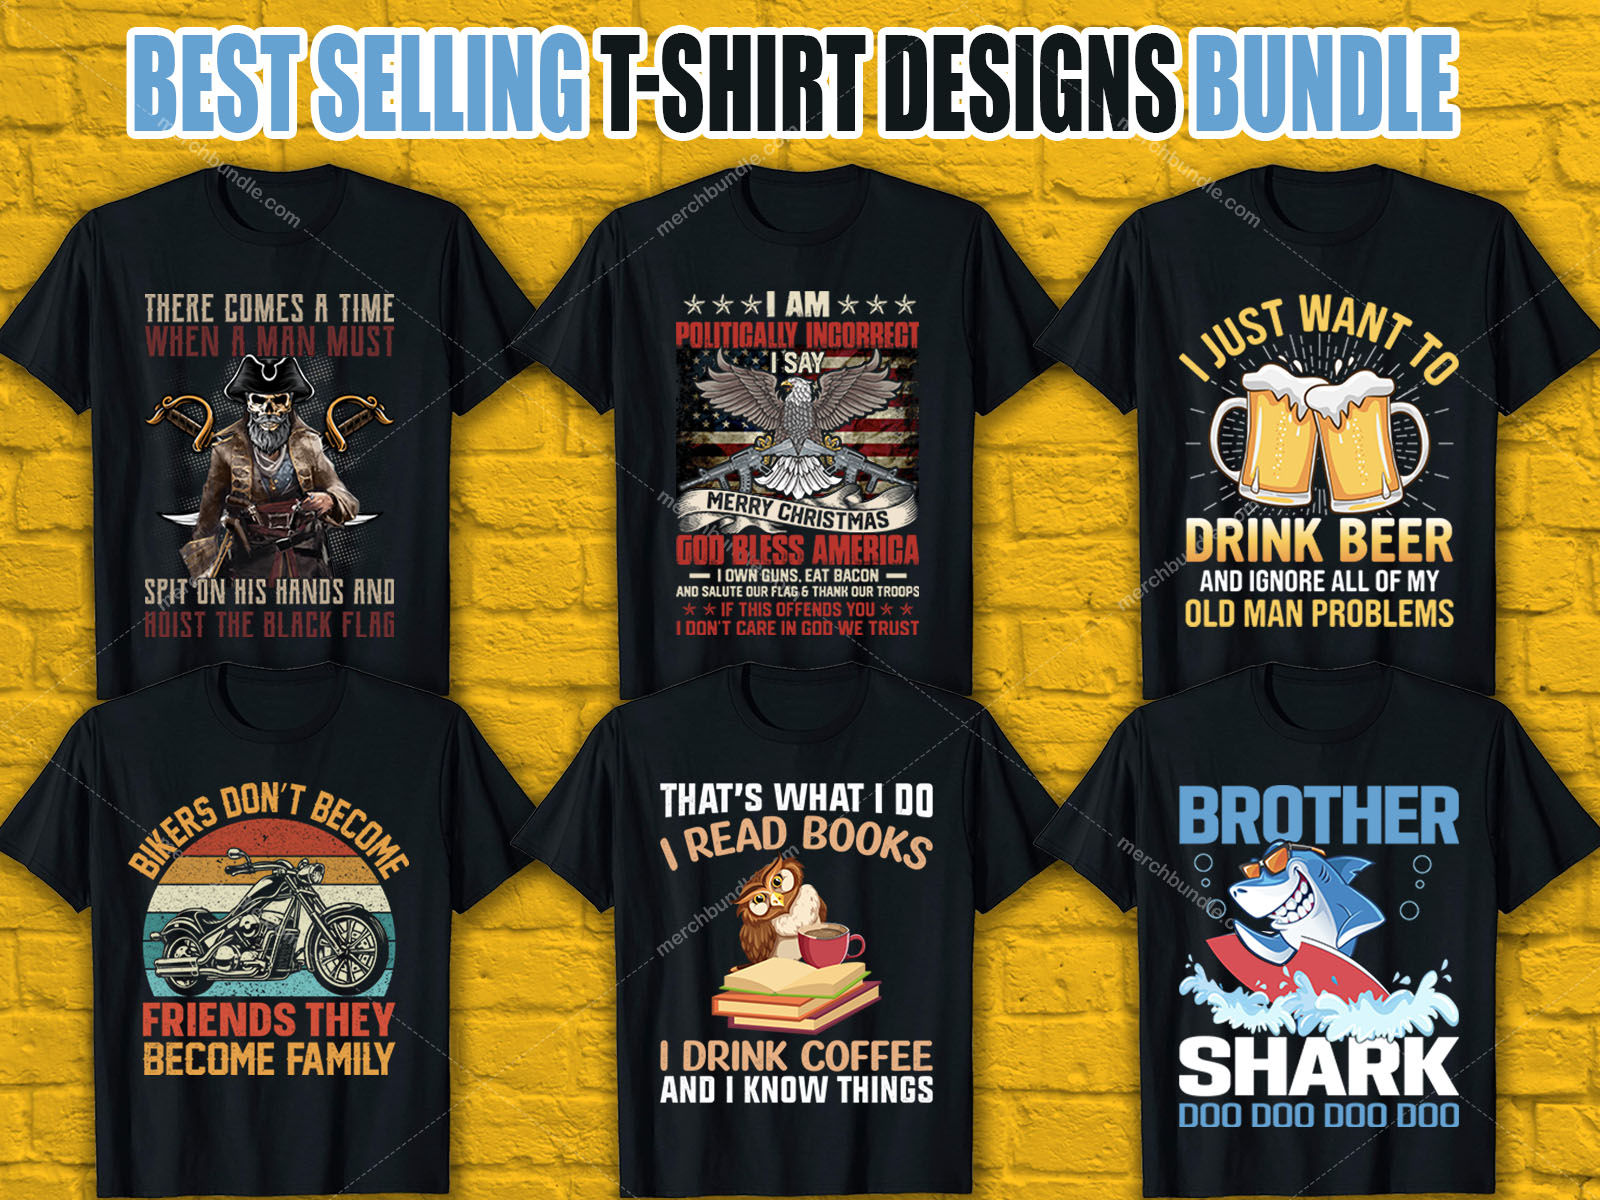 Best Selling TShirt Designs For Merch By Amazon by Merch Bundle on